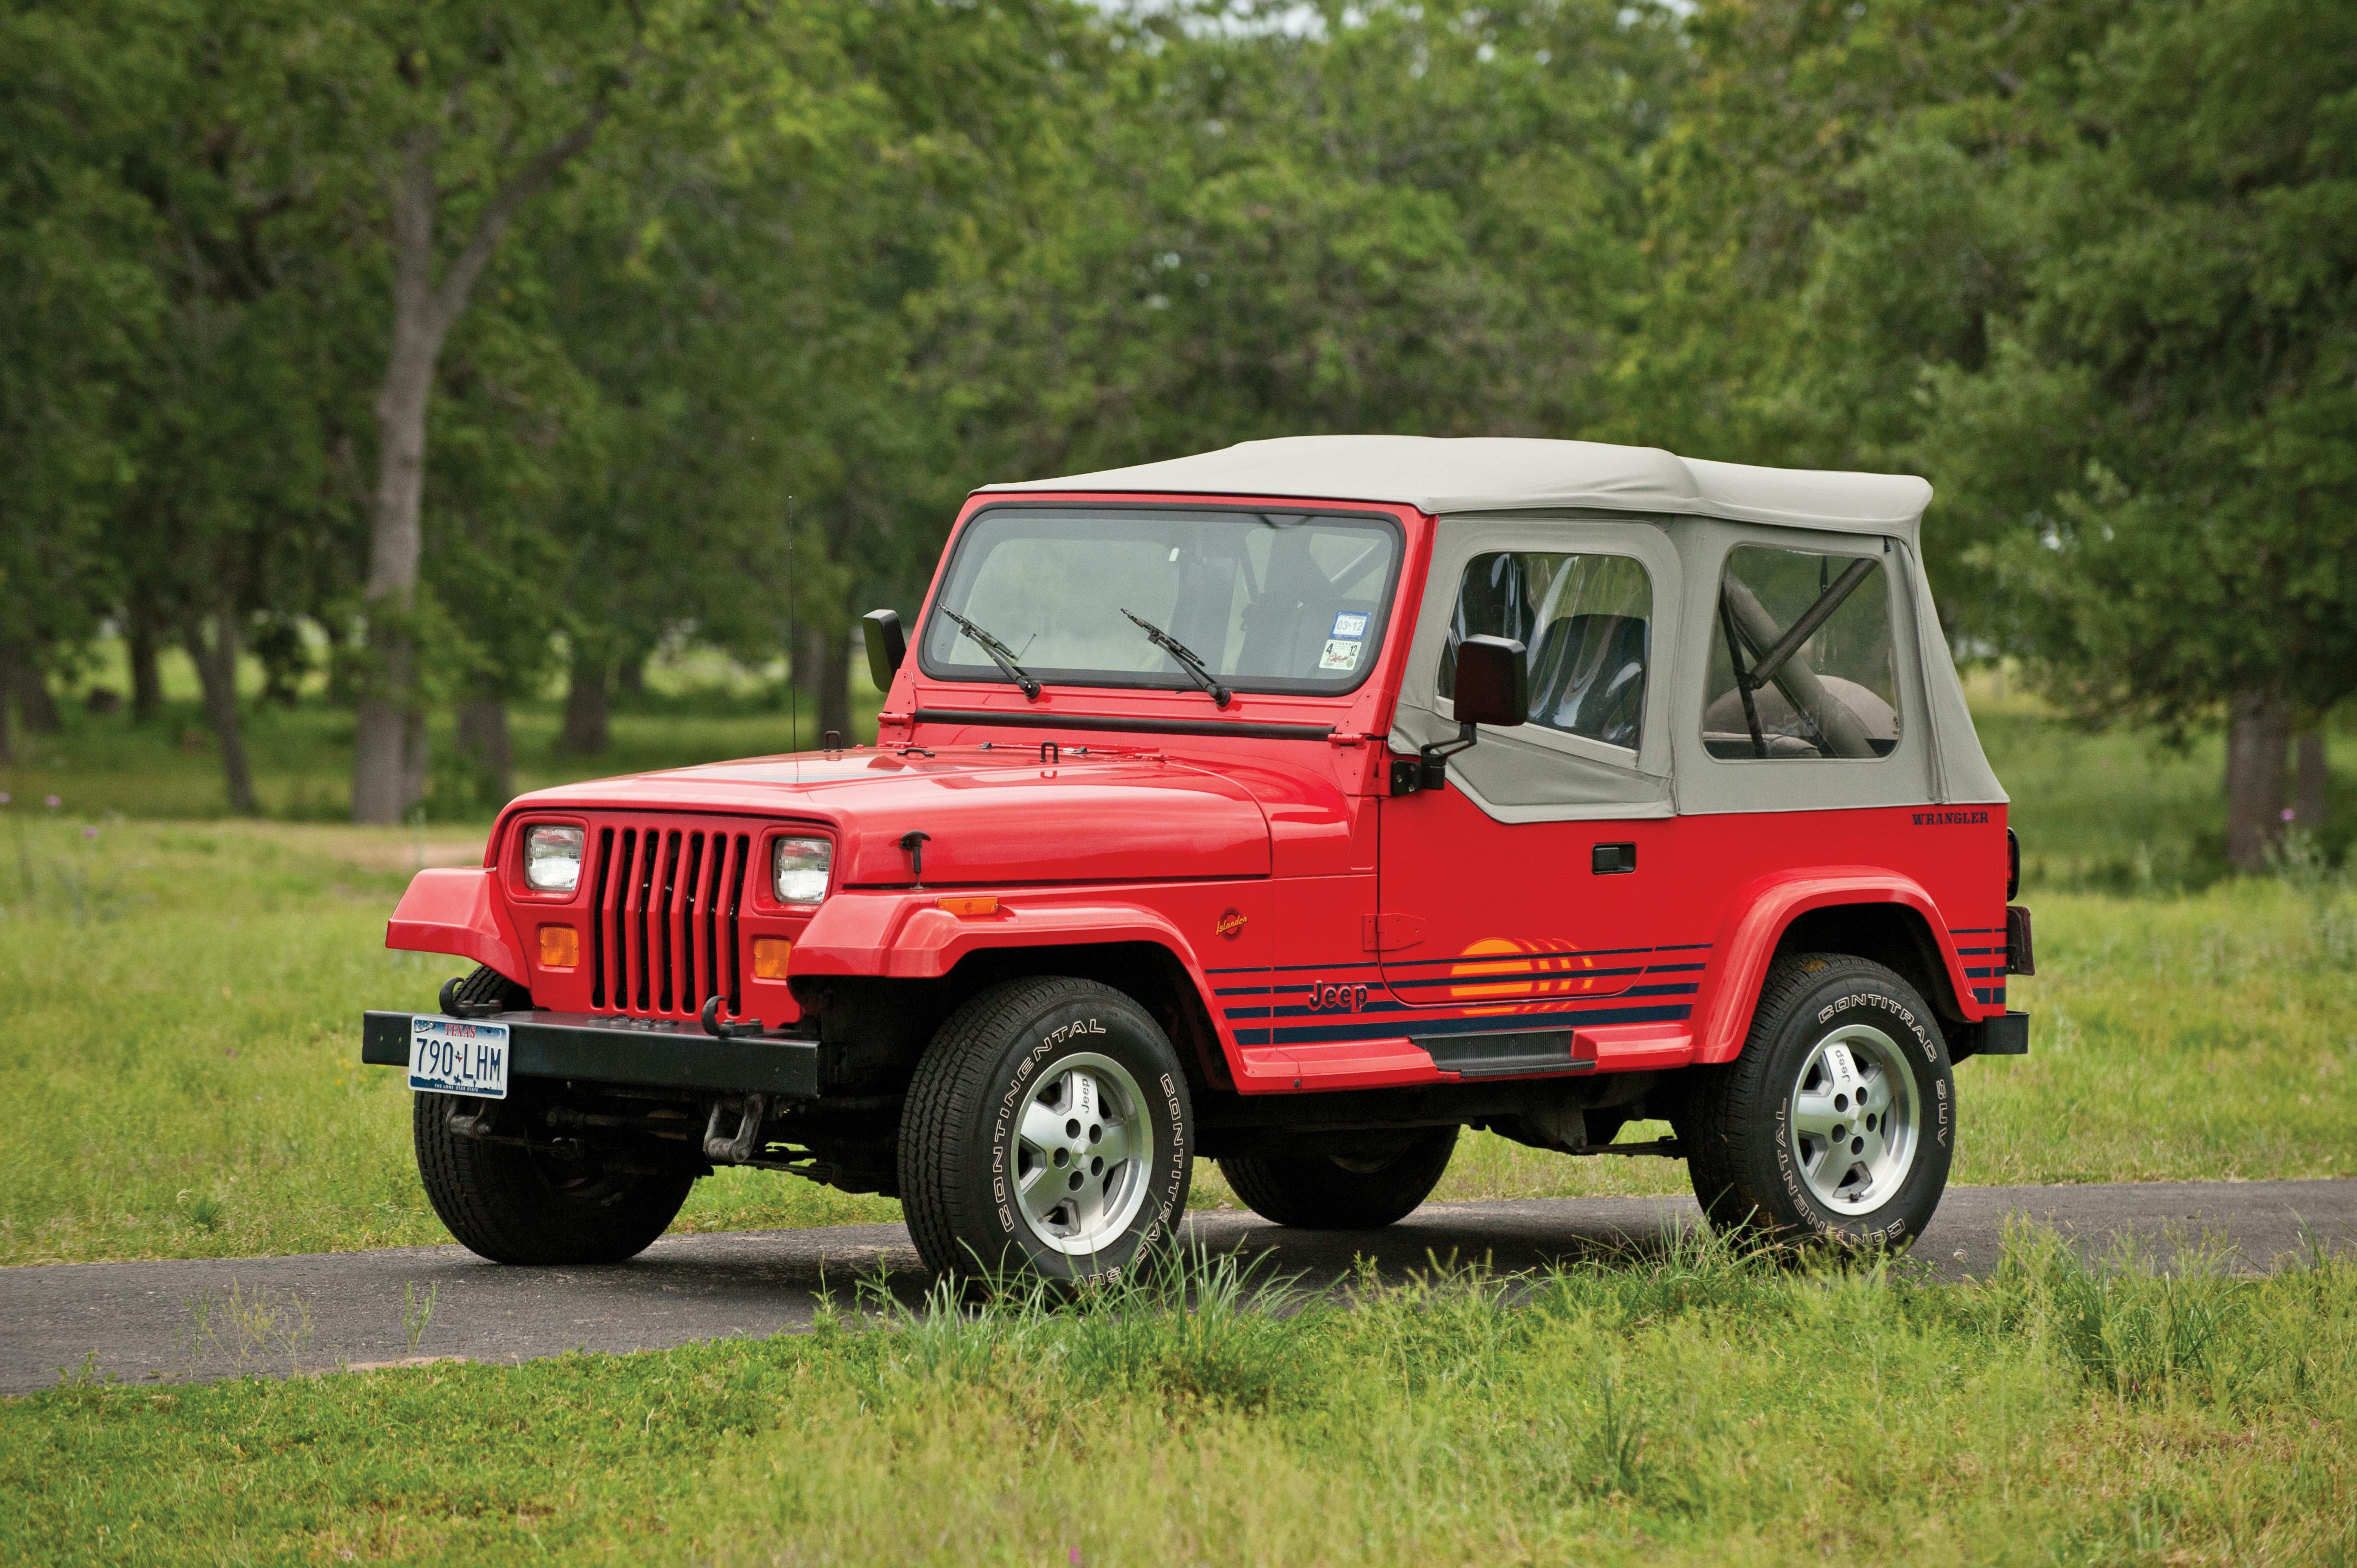 1988 Jeep Wrangler Base | Hagerty Valuation Tools